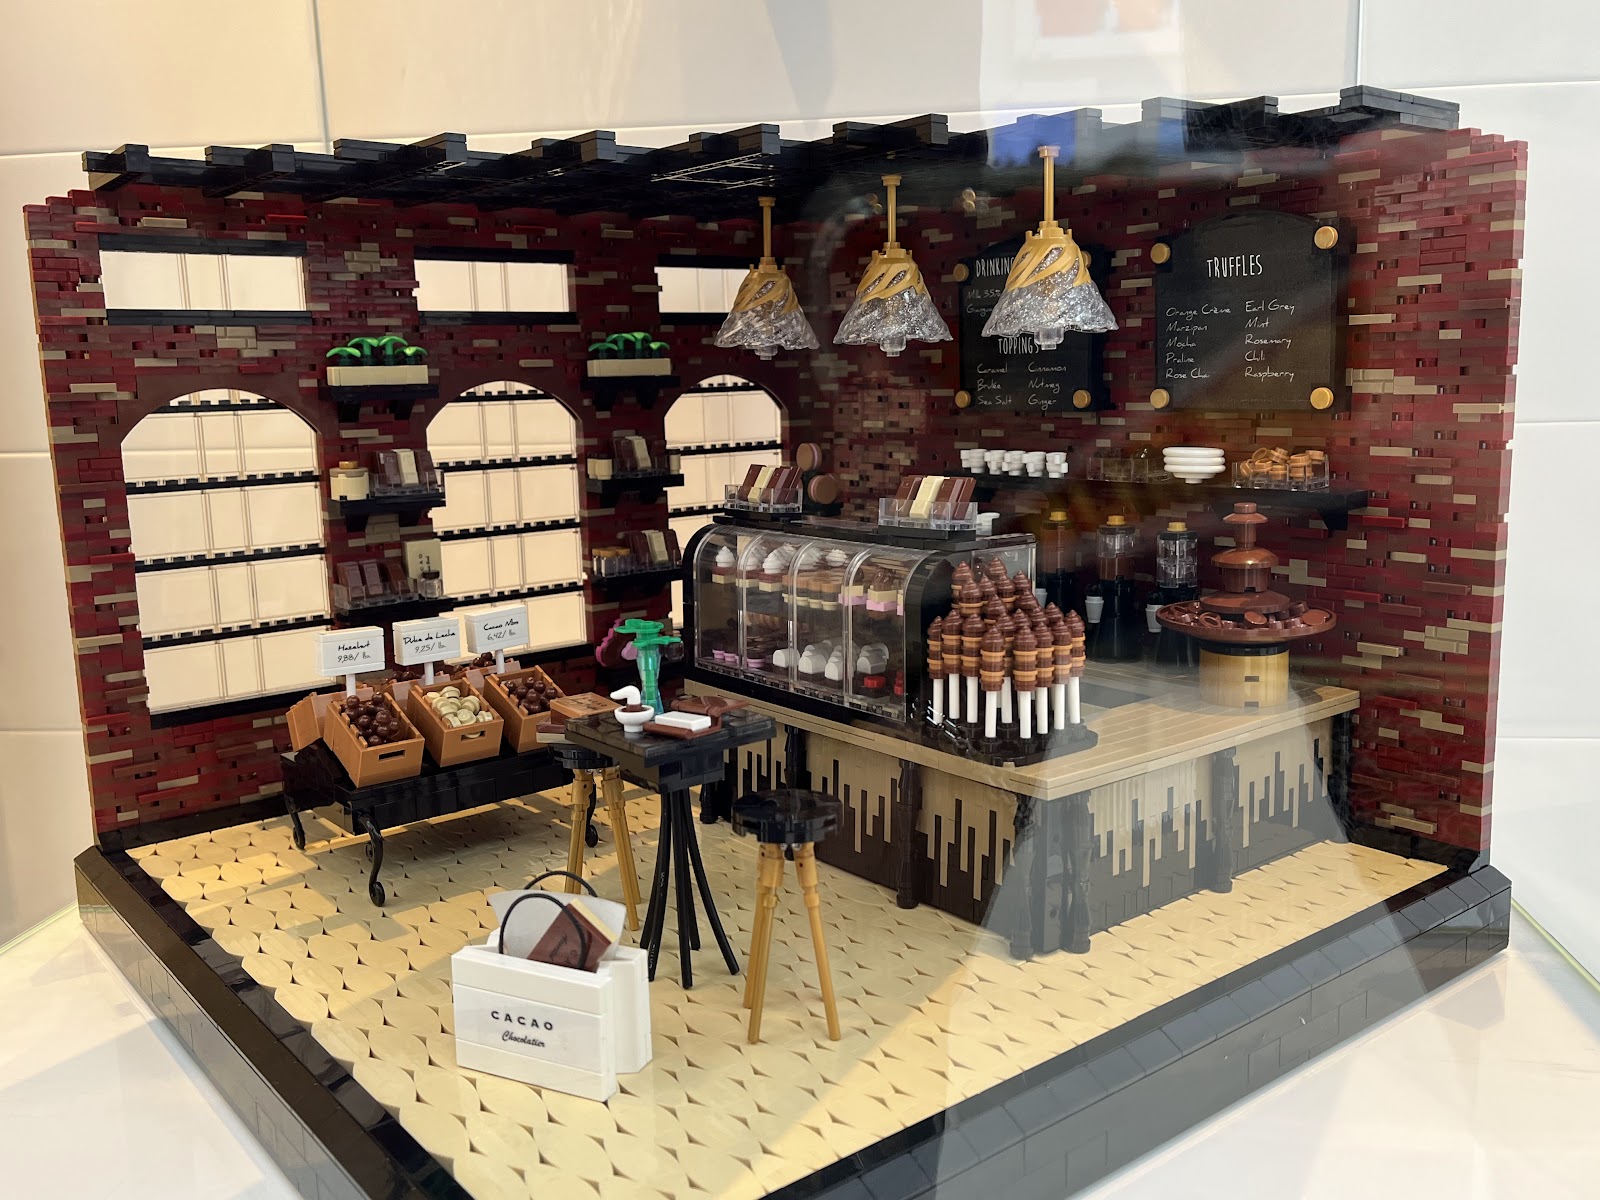 A photo of the LEGO creation Chocolate Shop by Kelly Bartlett, on display in the Masterpiece Gallery in the LEGO House